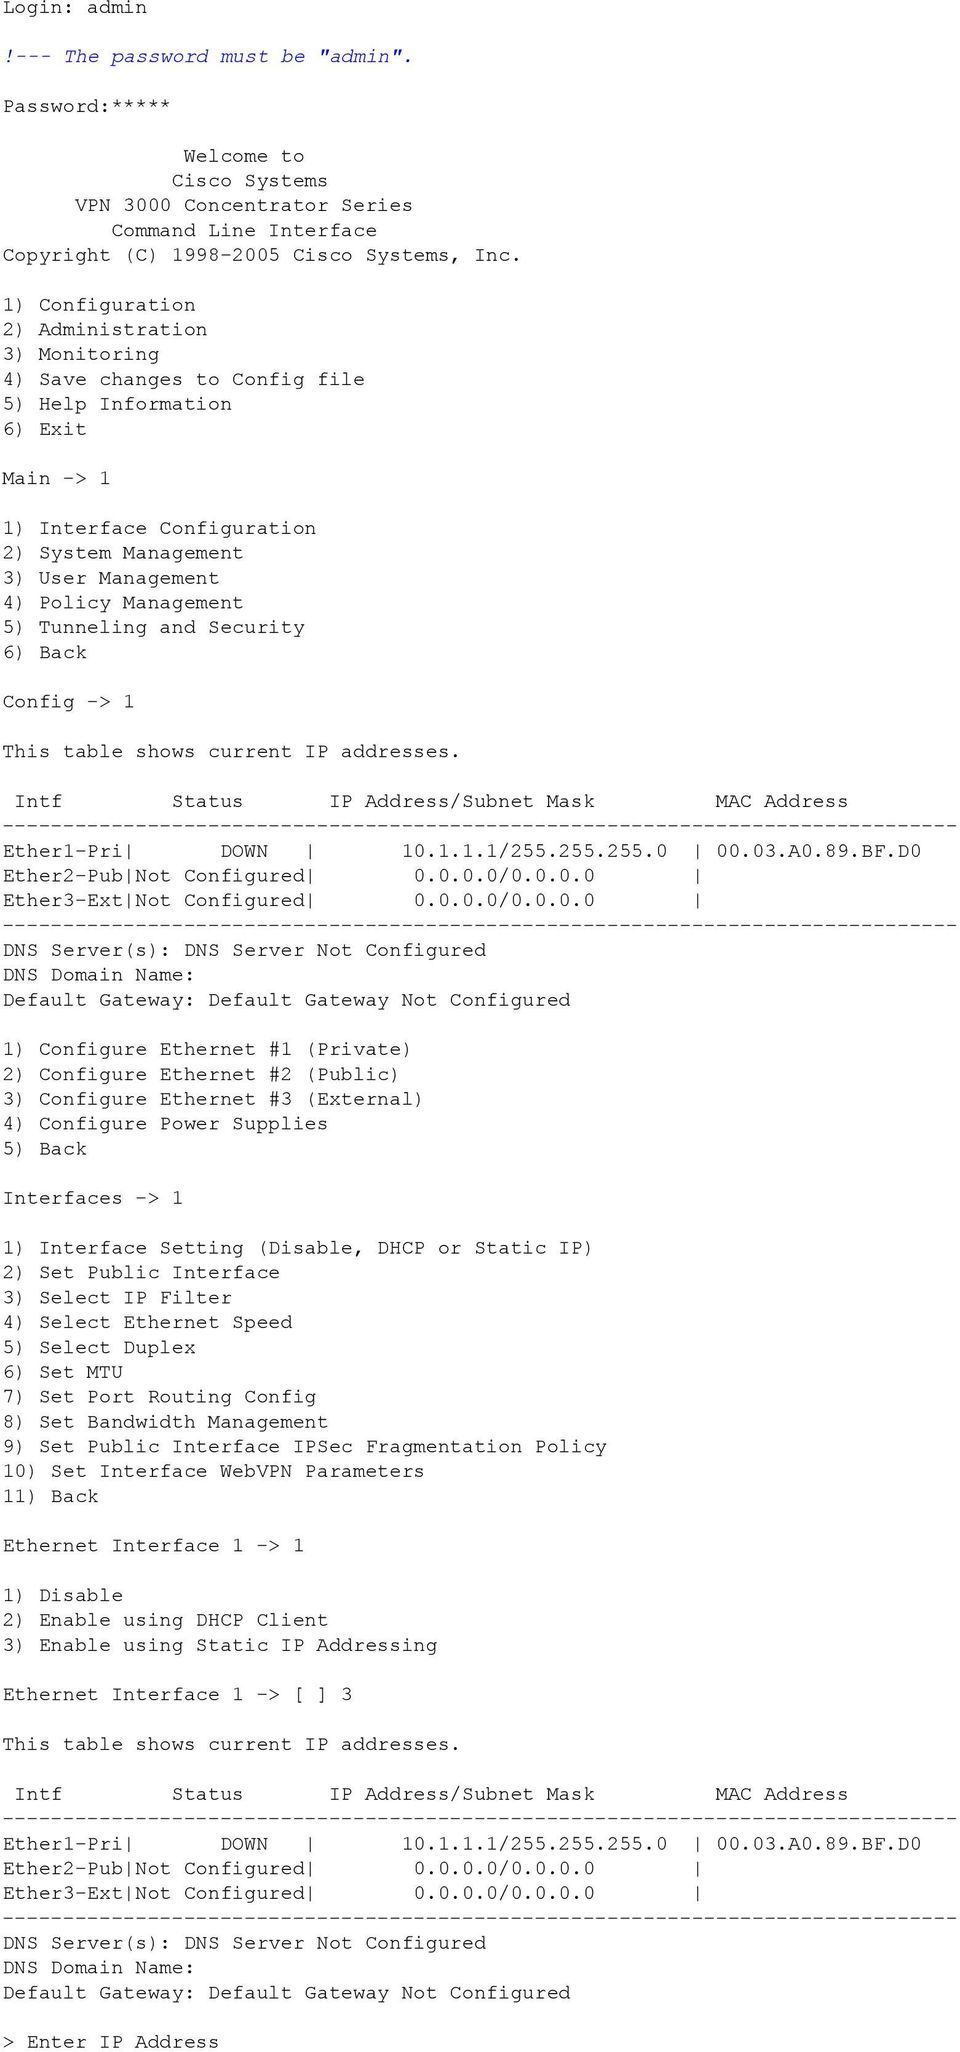 Management 5) Tunneling and Security 6) Back Config -> 1 This table shows current IP addresses.